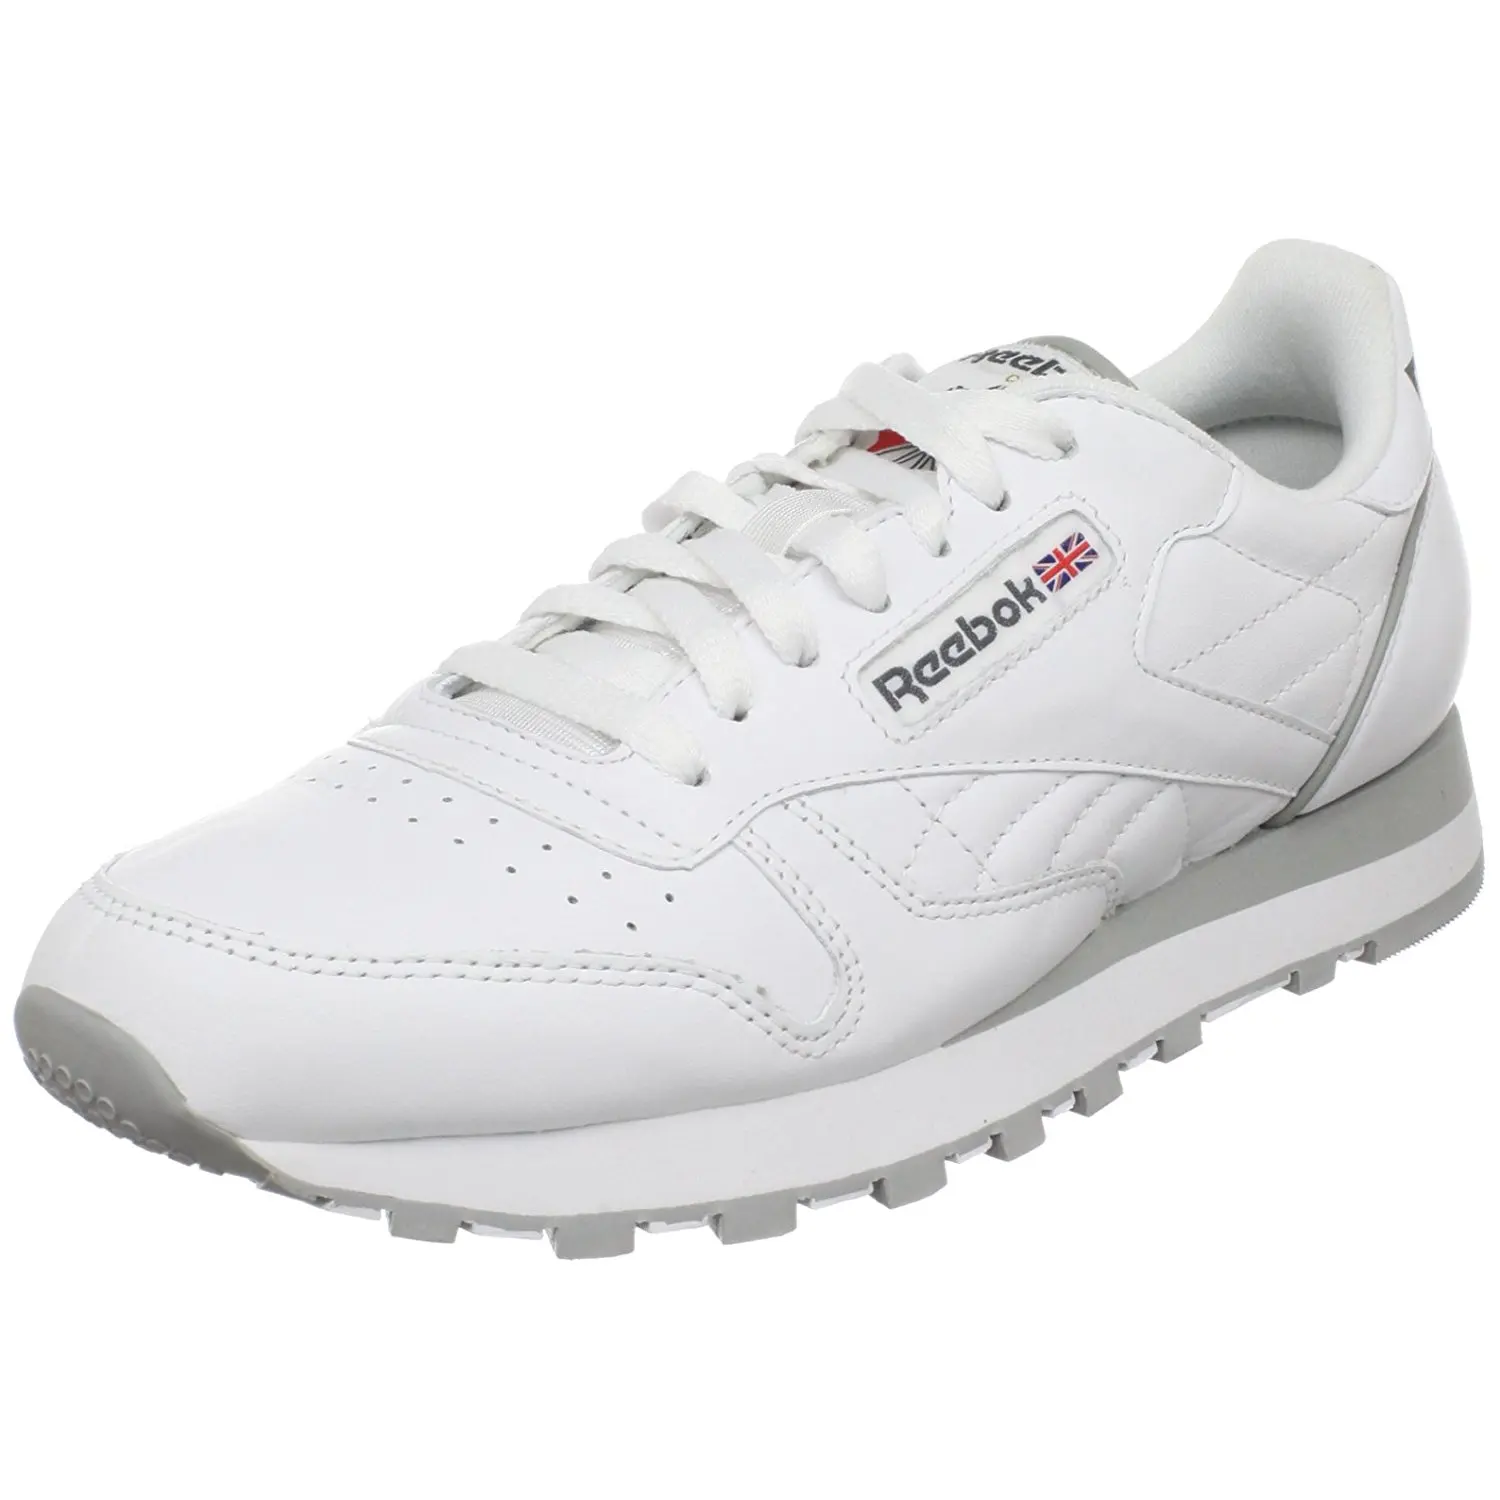 Cheap Classic Leather Reebok, find Classic Leather Reebok deals on line ...